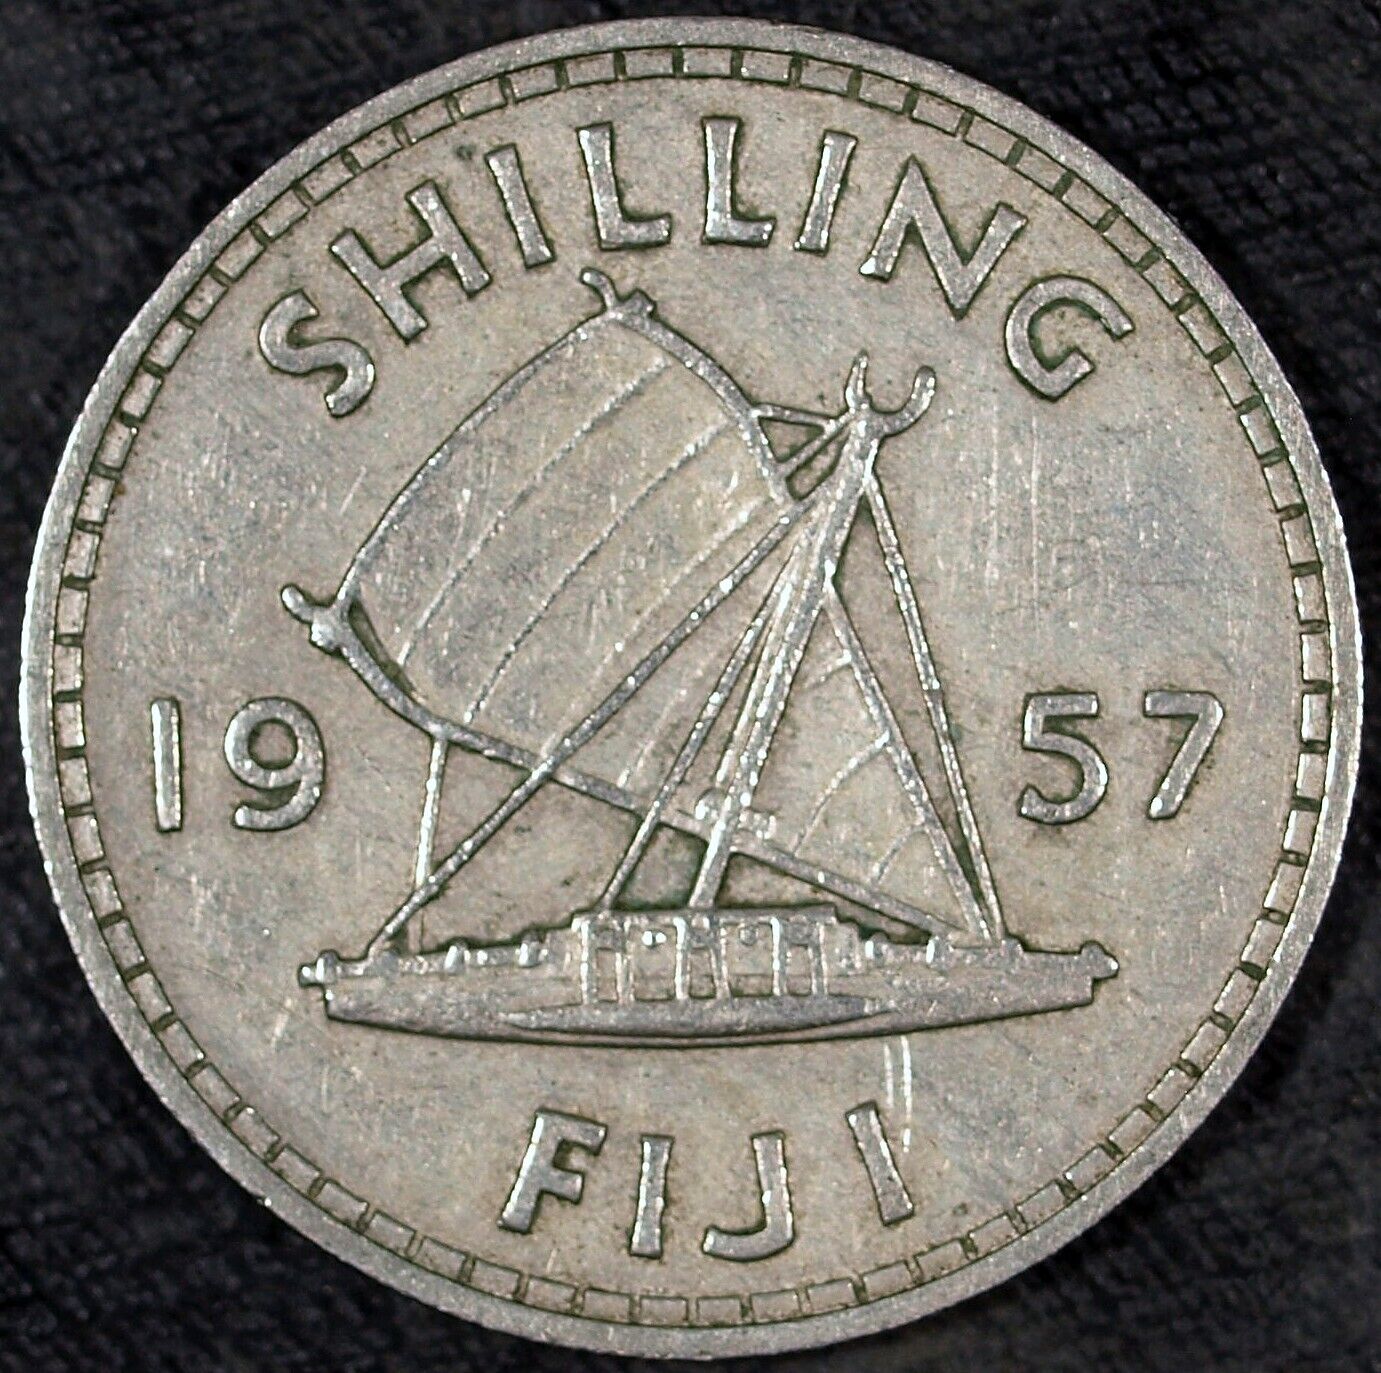 1957 Fiji One Shilling ☆☆ Circulated ☆☆ Great Collectible 107